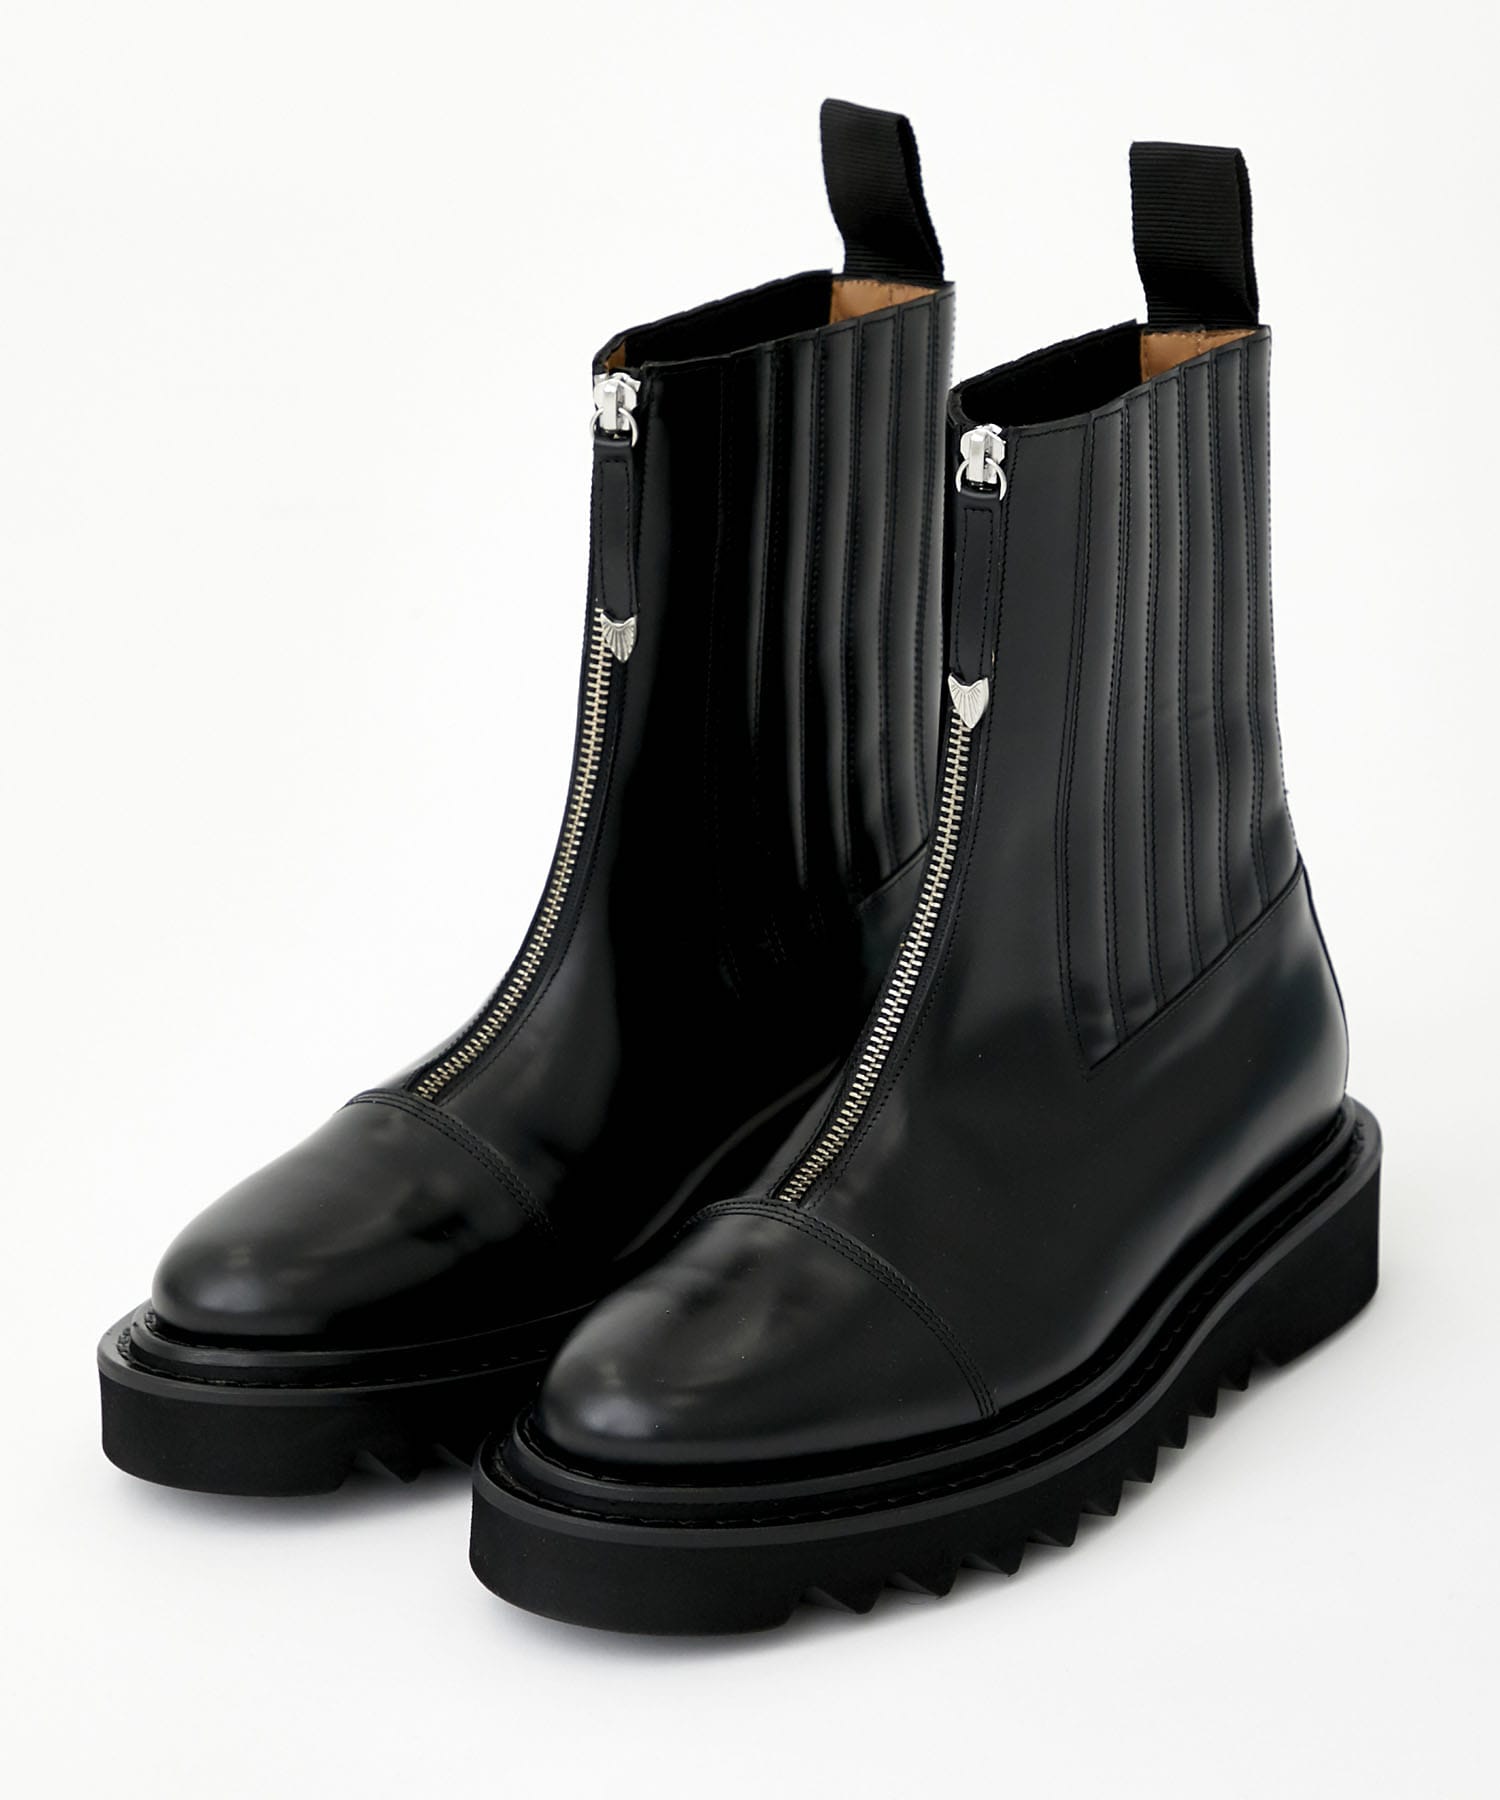 FRONT ZIP BOOT BLACK LEATHER